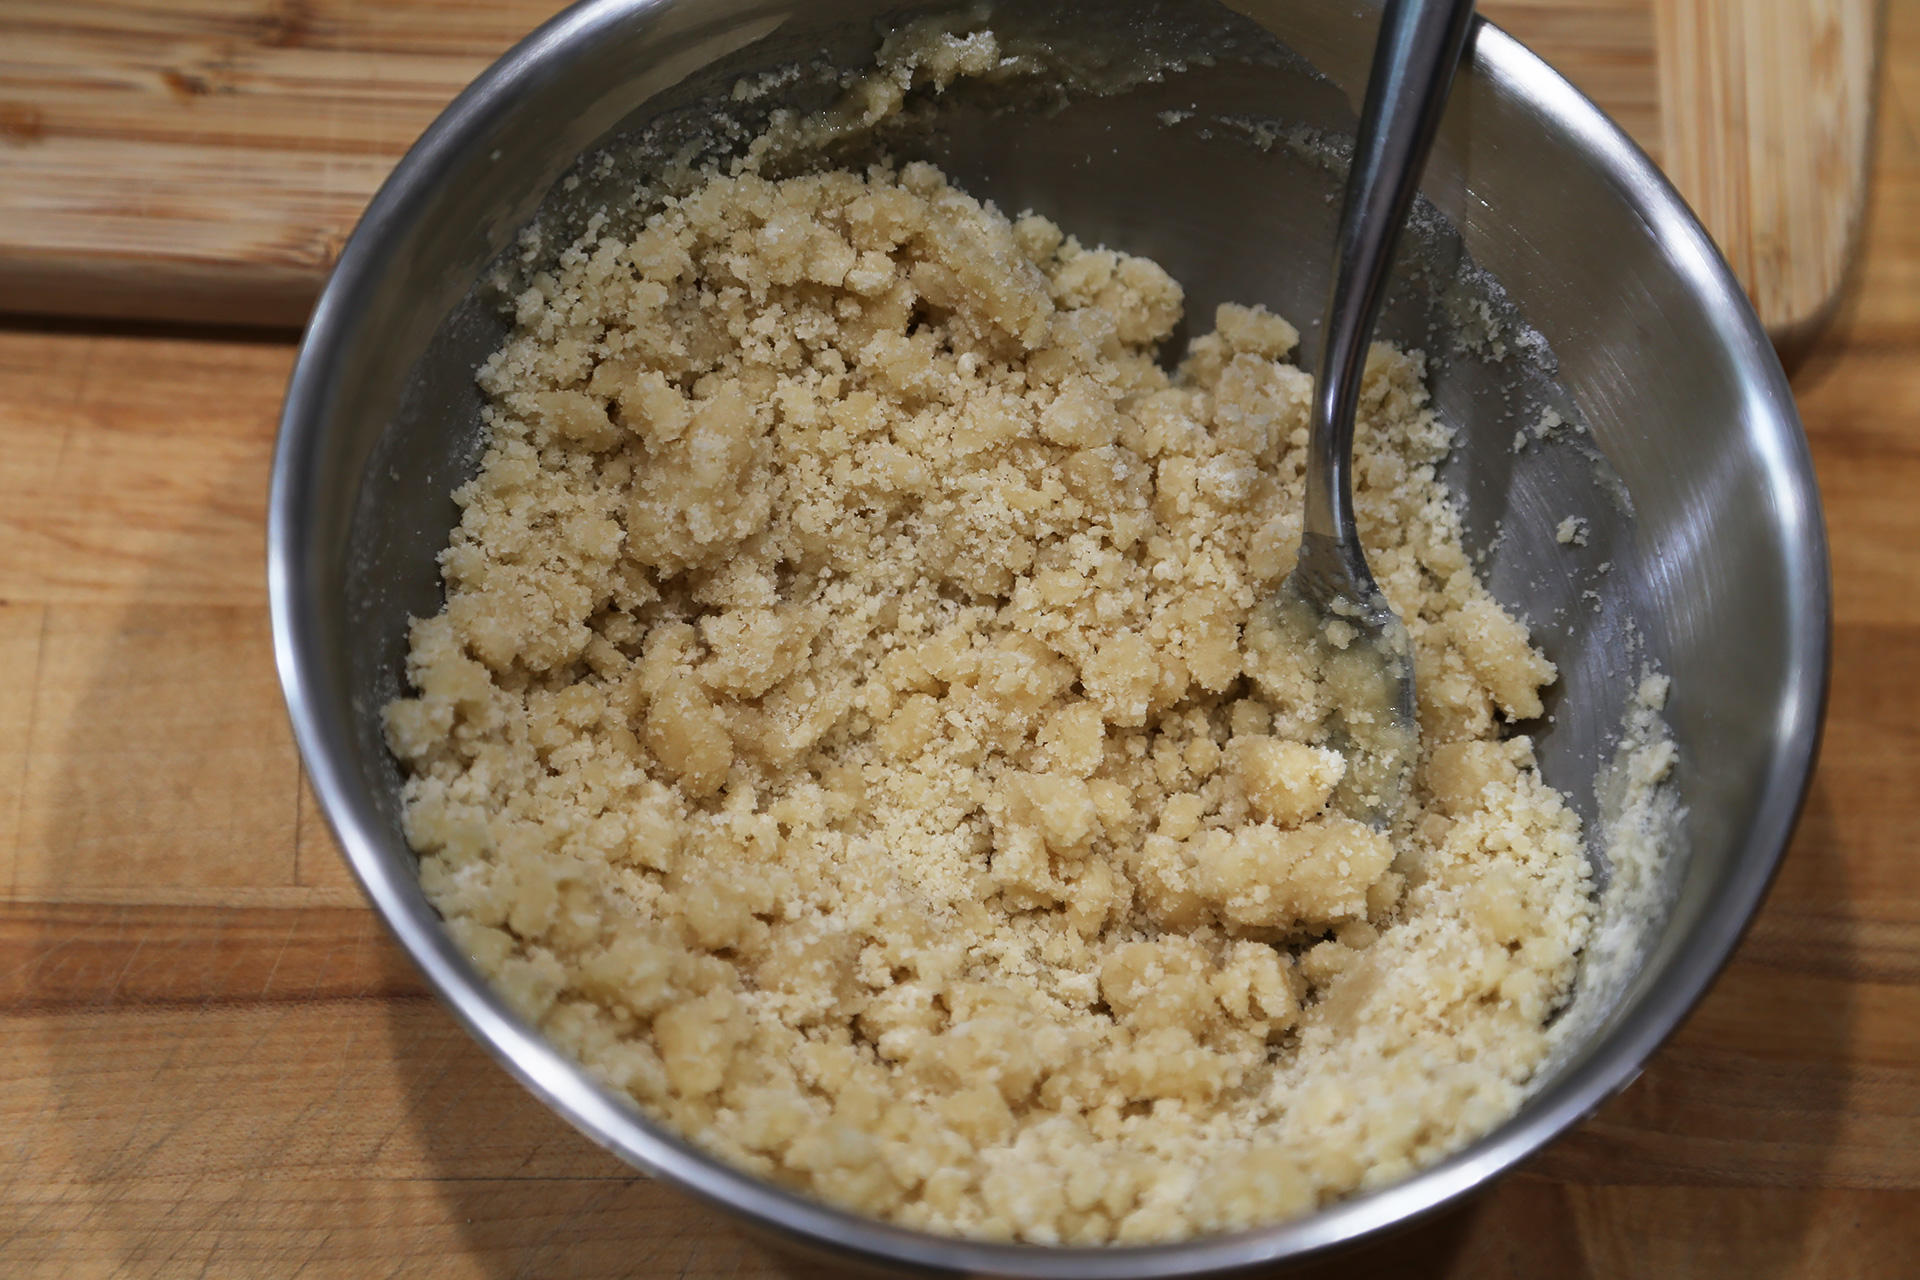 Use crumble right away or refrigerate, covered, until ready to use.